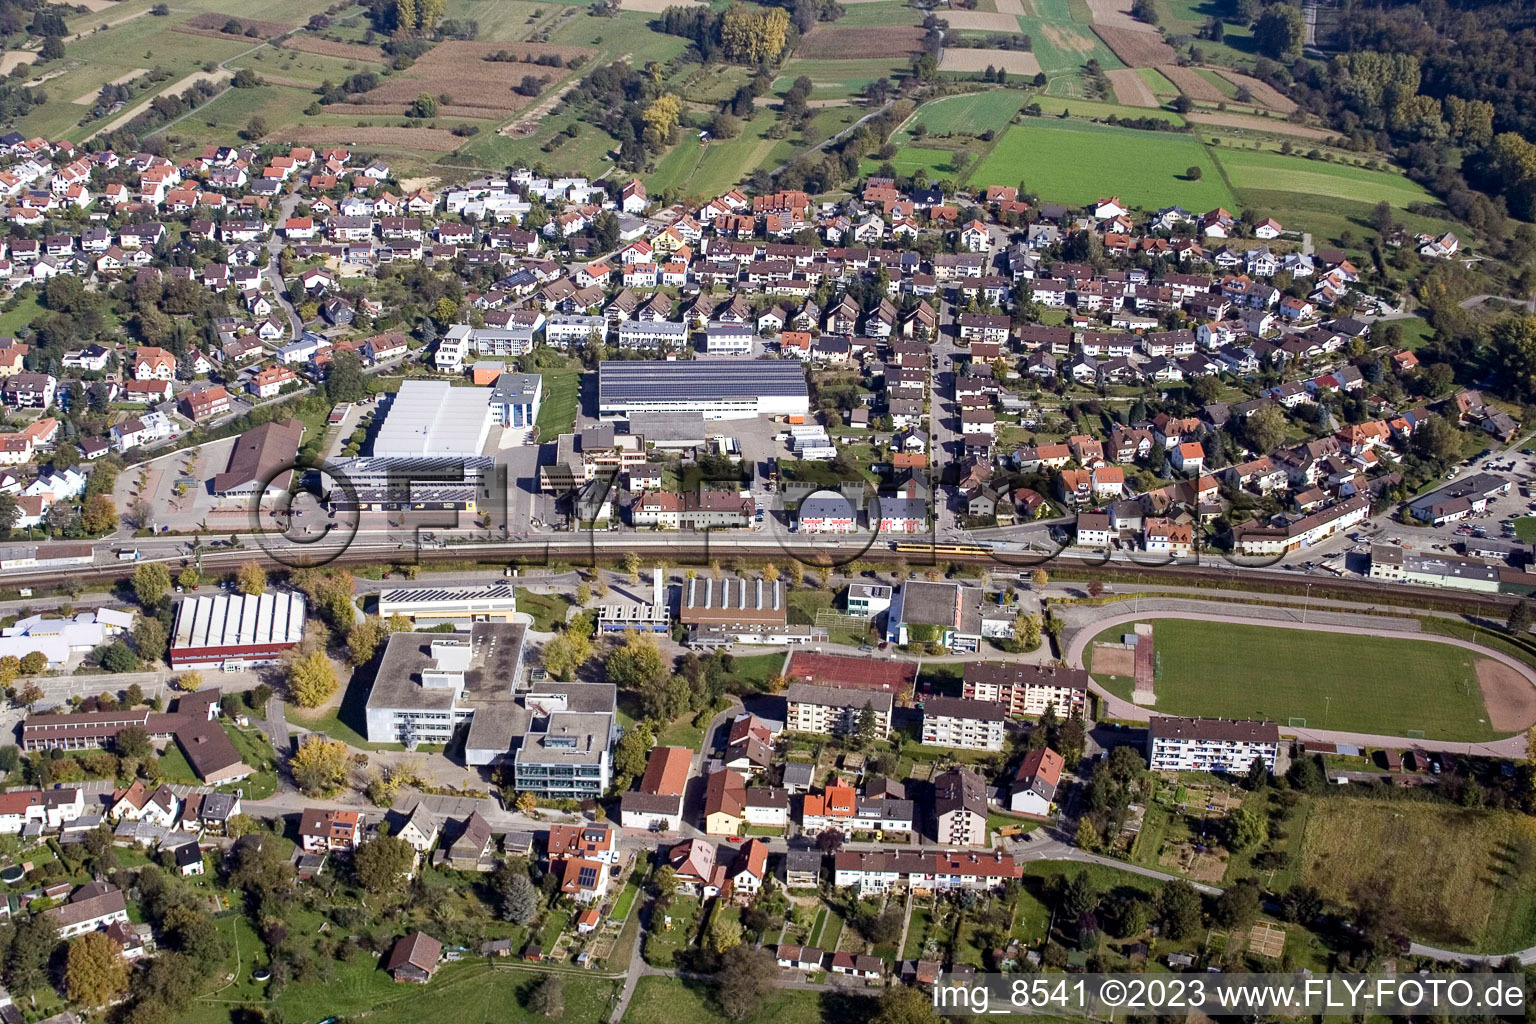 School building of the Ludwig-Marum-Gymnasium Pfinztal in the district Berghausen in Pfinztal in the state Baden-Wurttemberg from the drone perspective